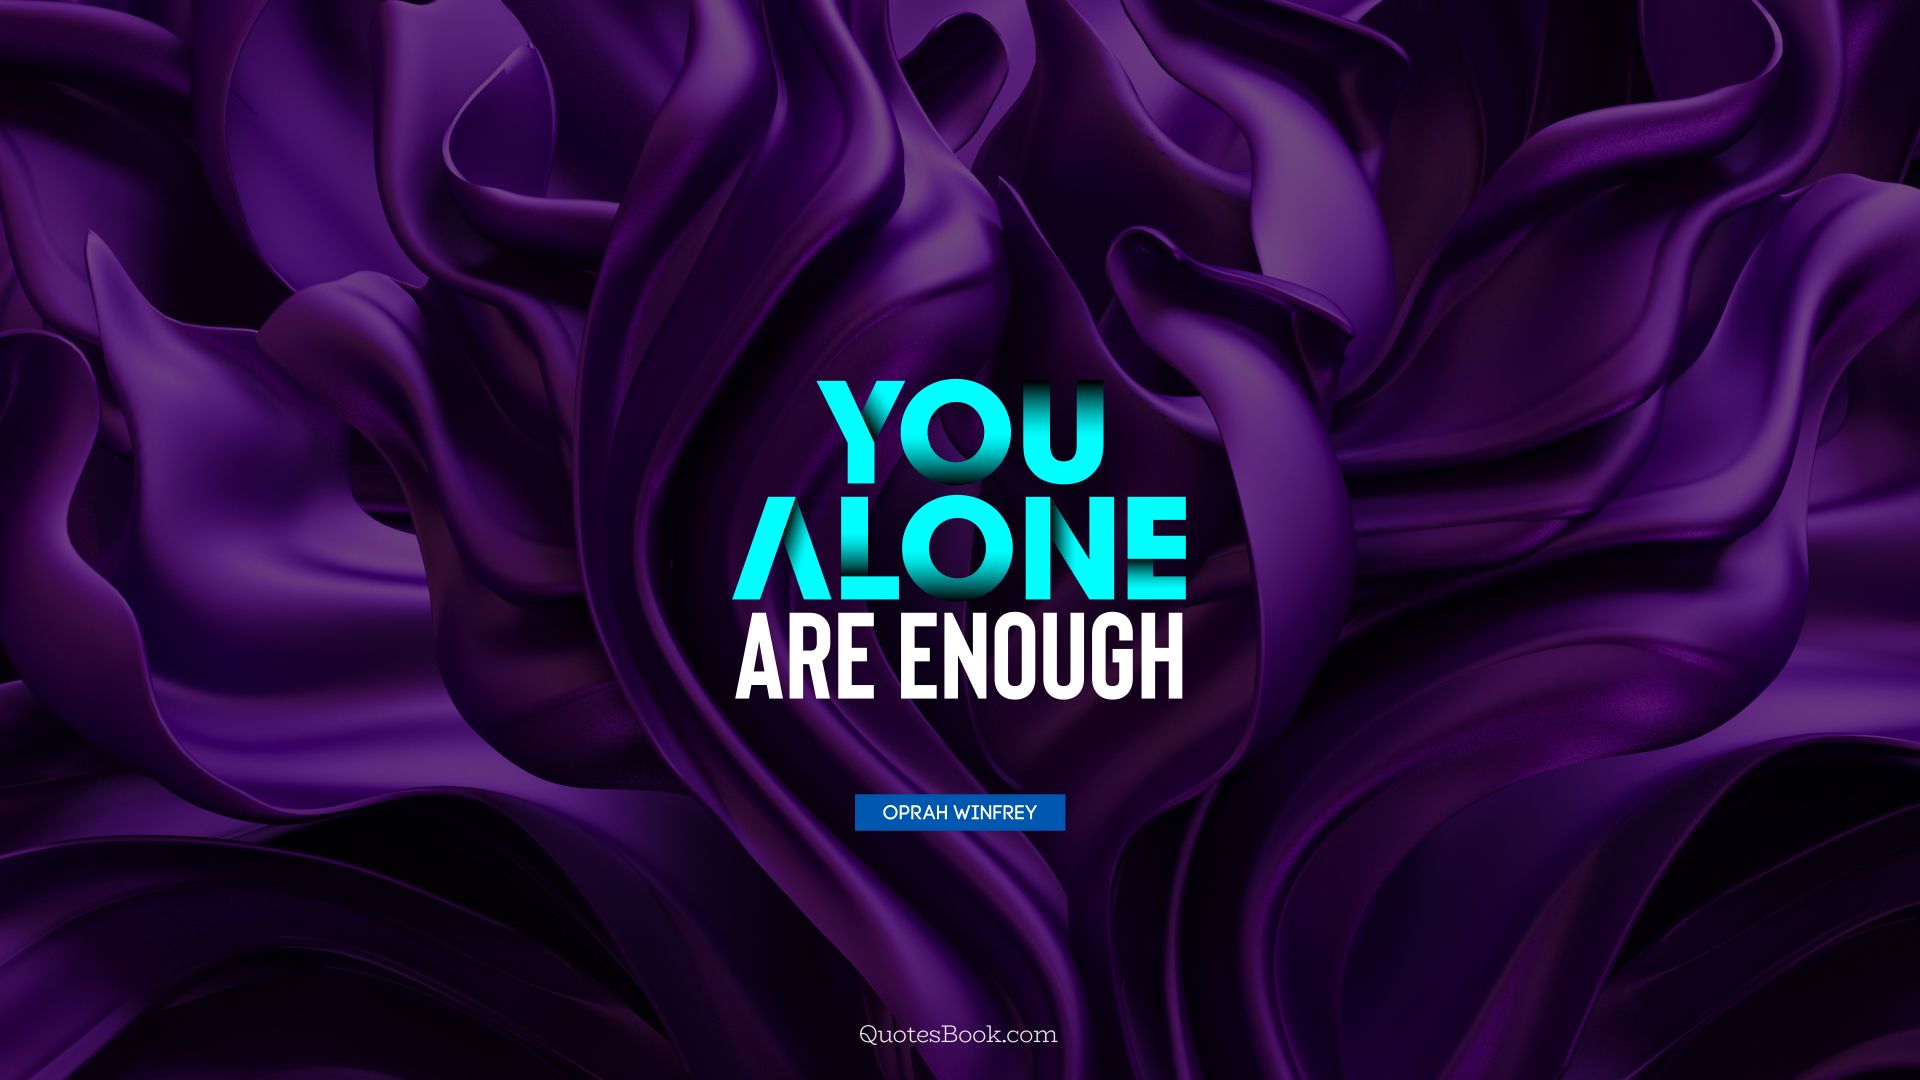 You alone are enough. - Quote by Oprah Winfrey